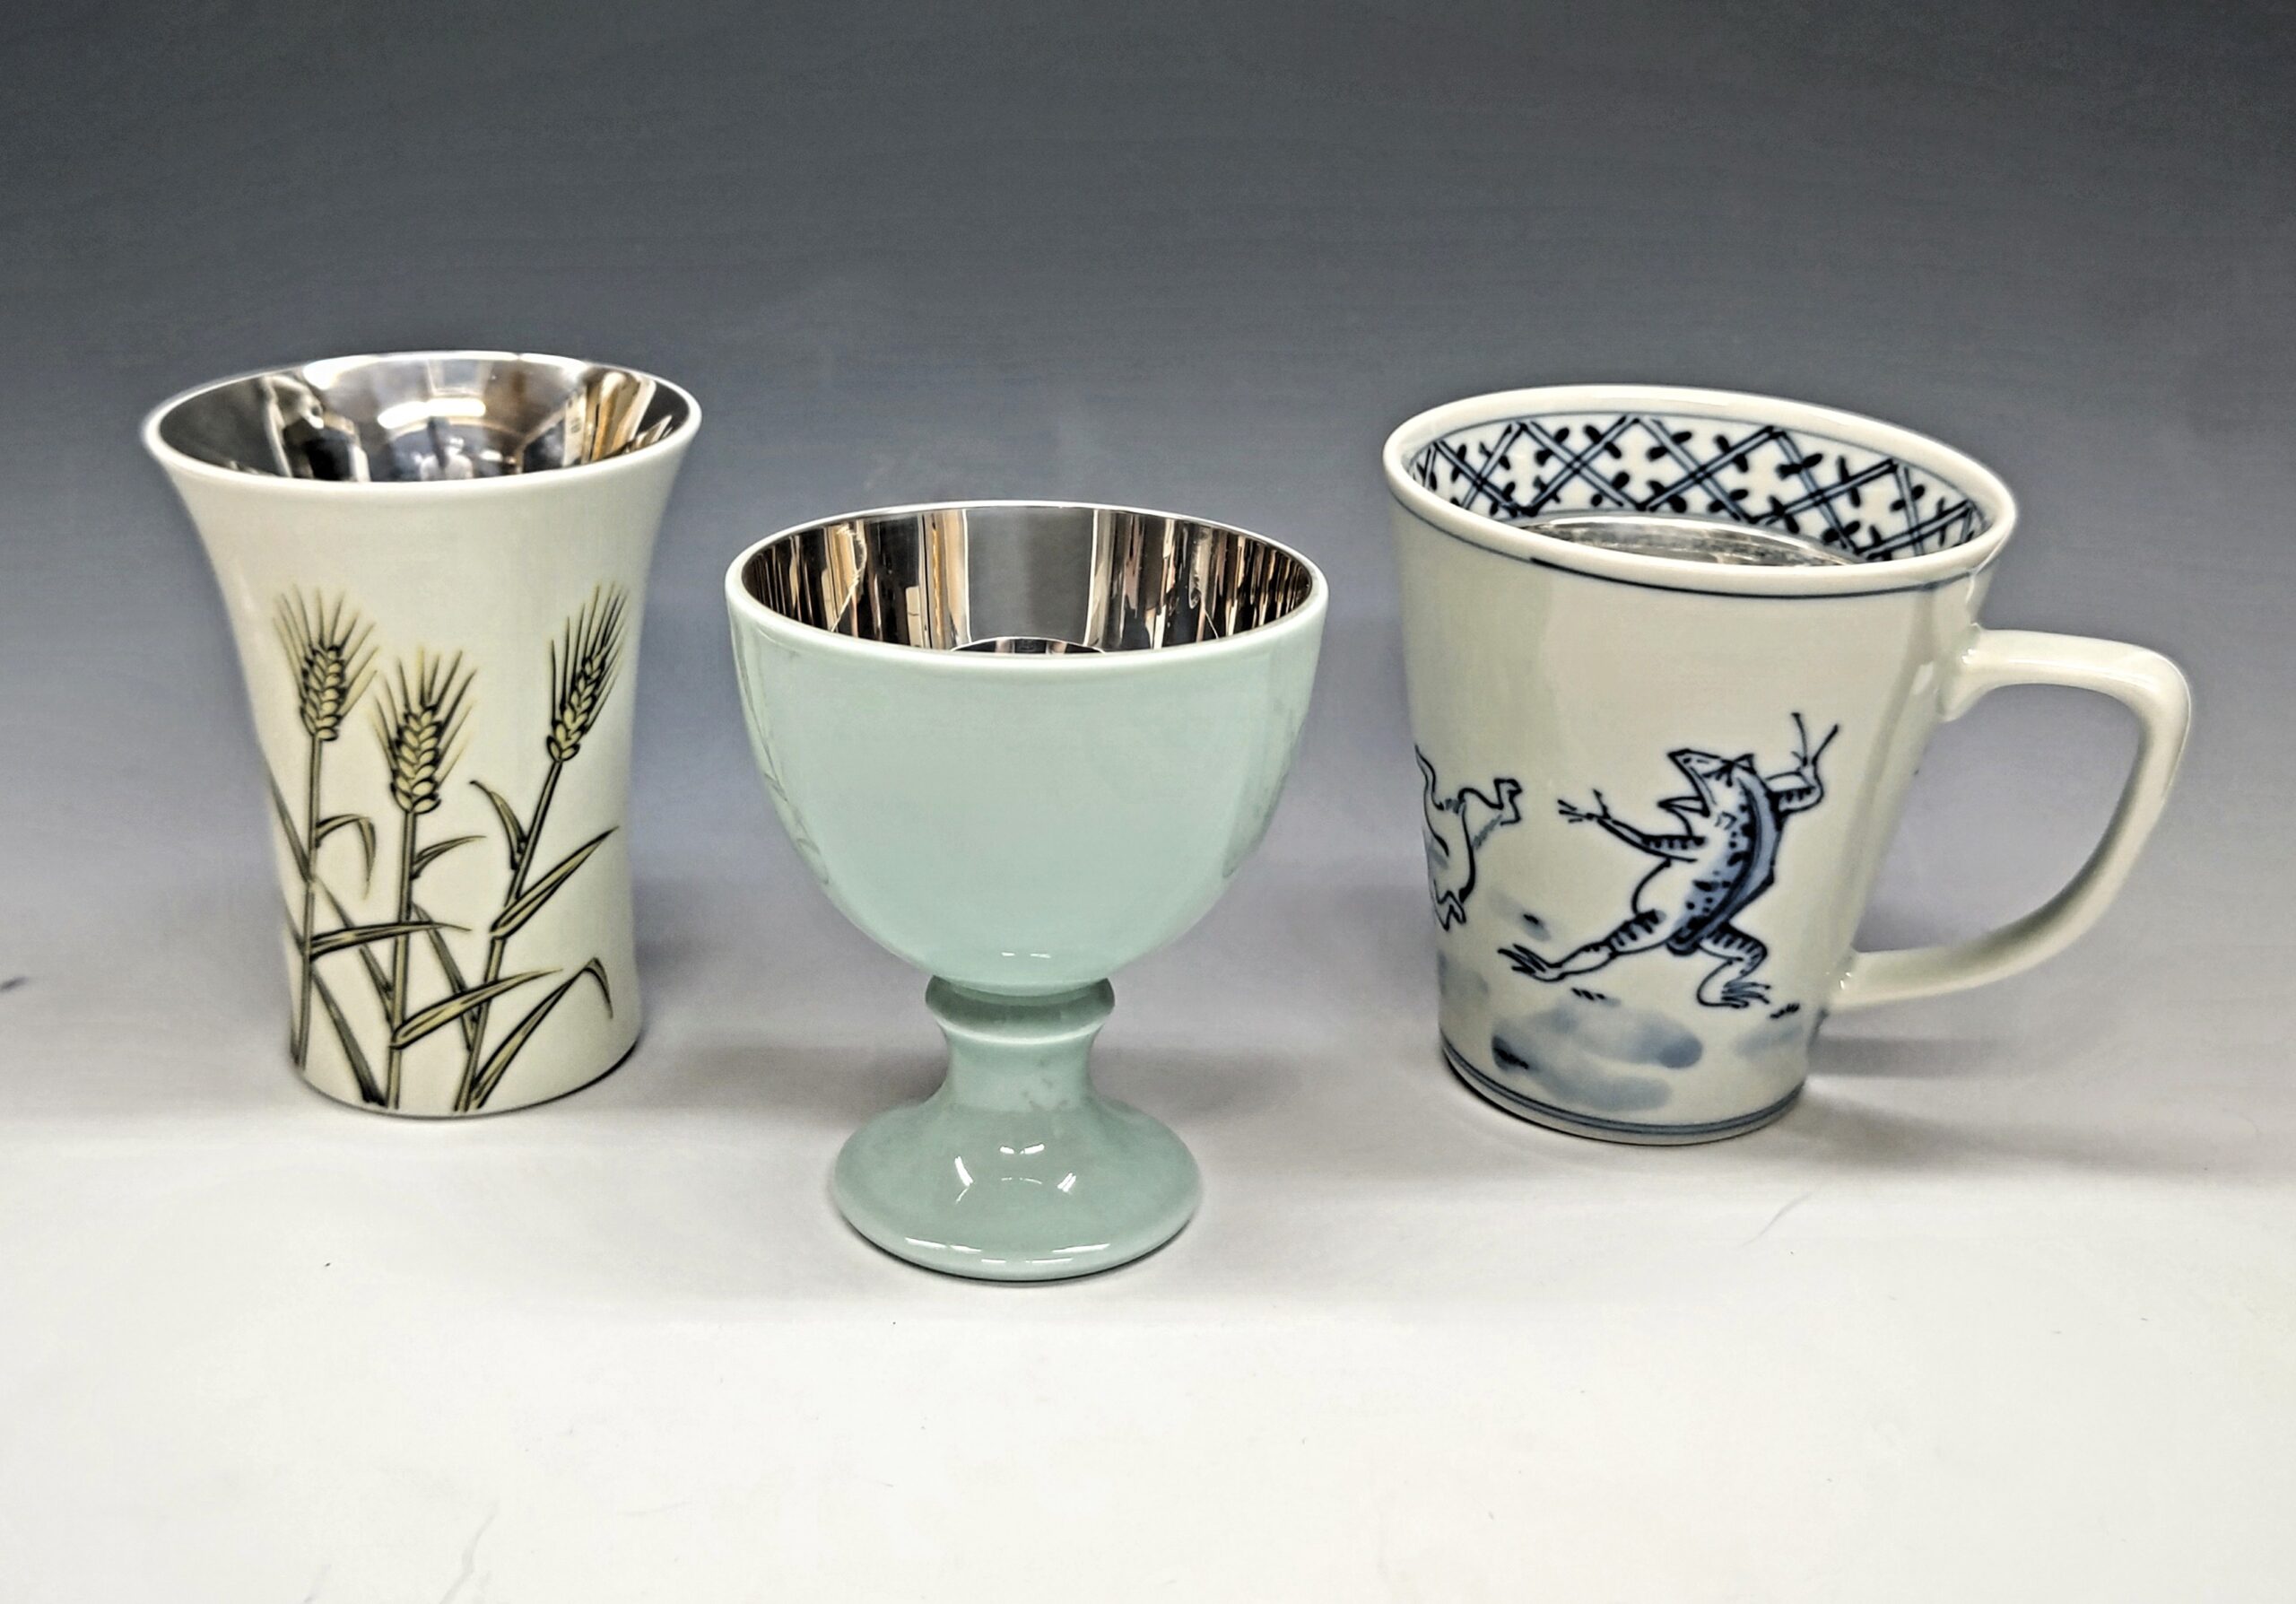 First ever matching for Arita-yaki Porcelain X Tokyo Silverware! A historical traditional craft since the 17th Century.